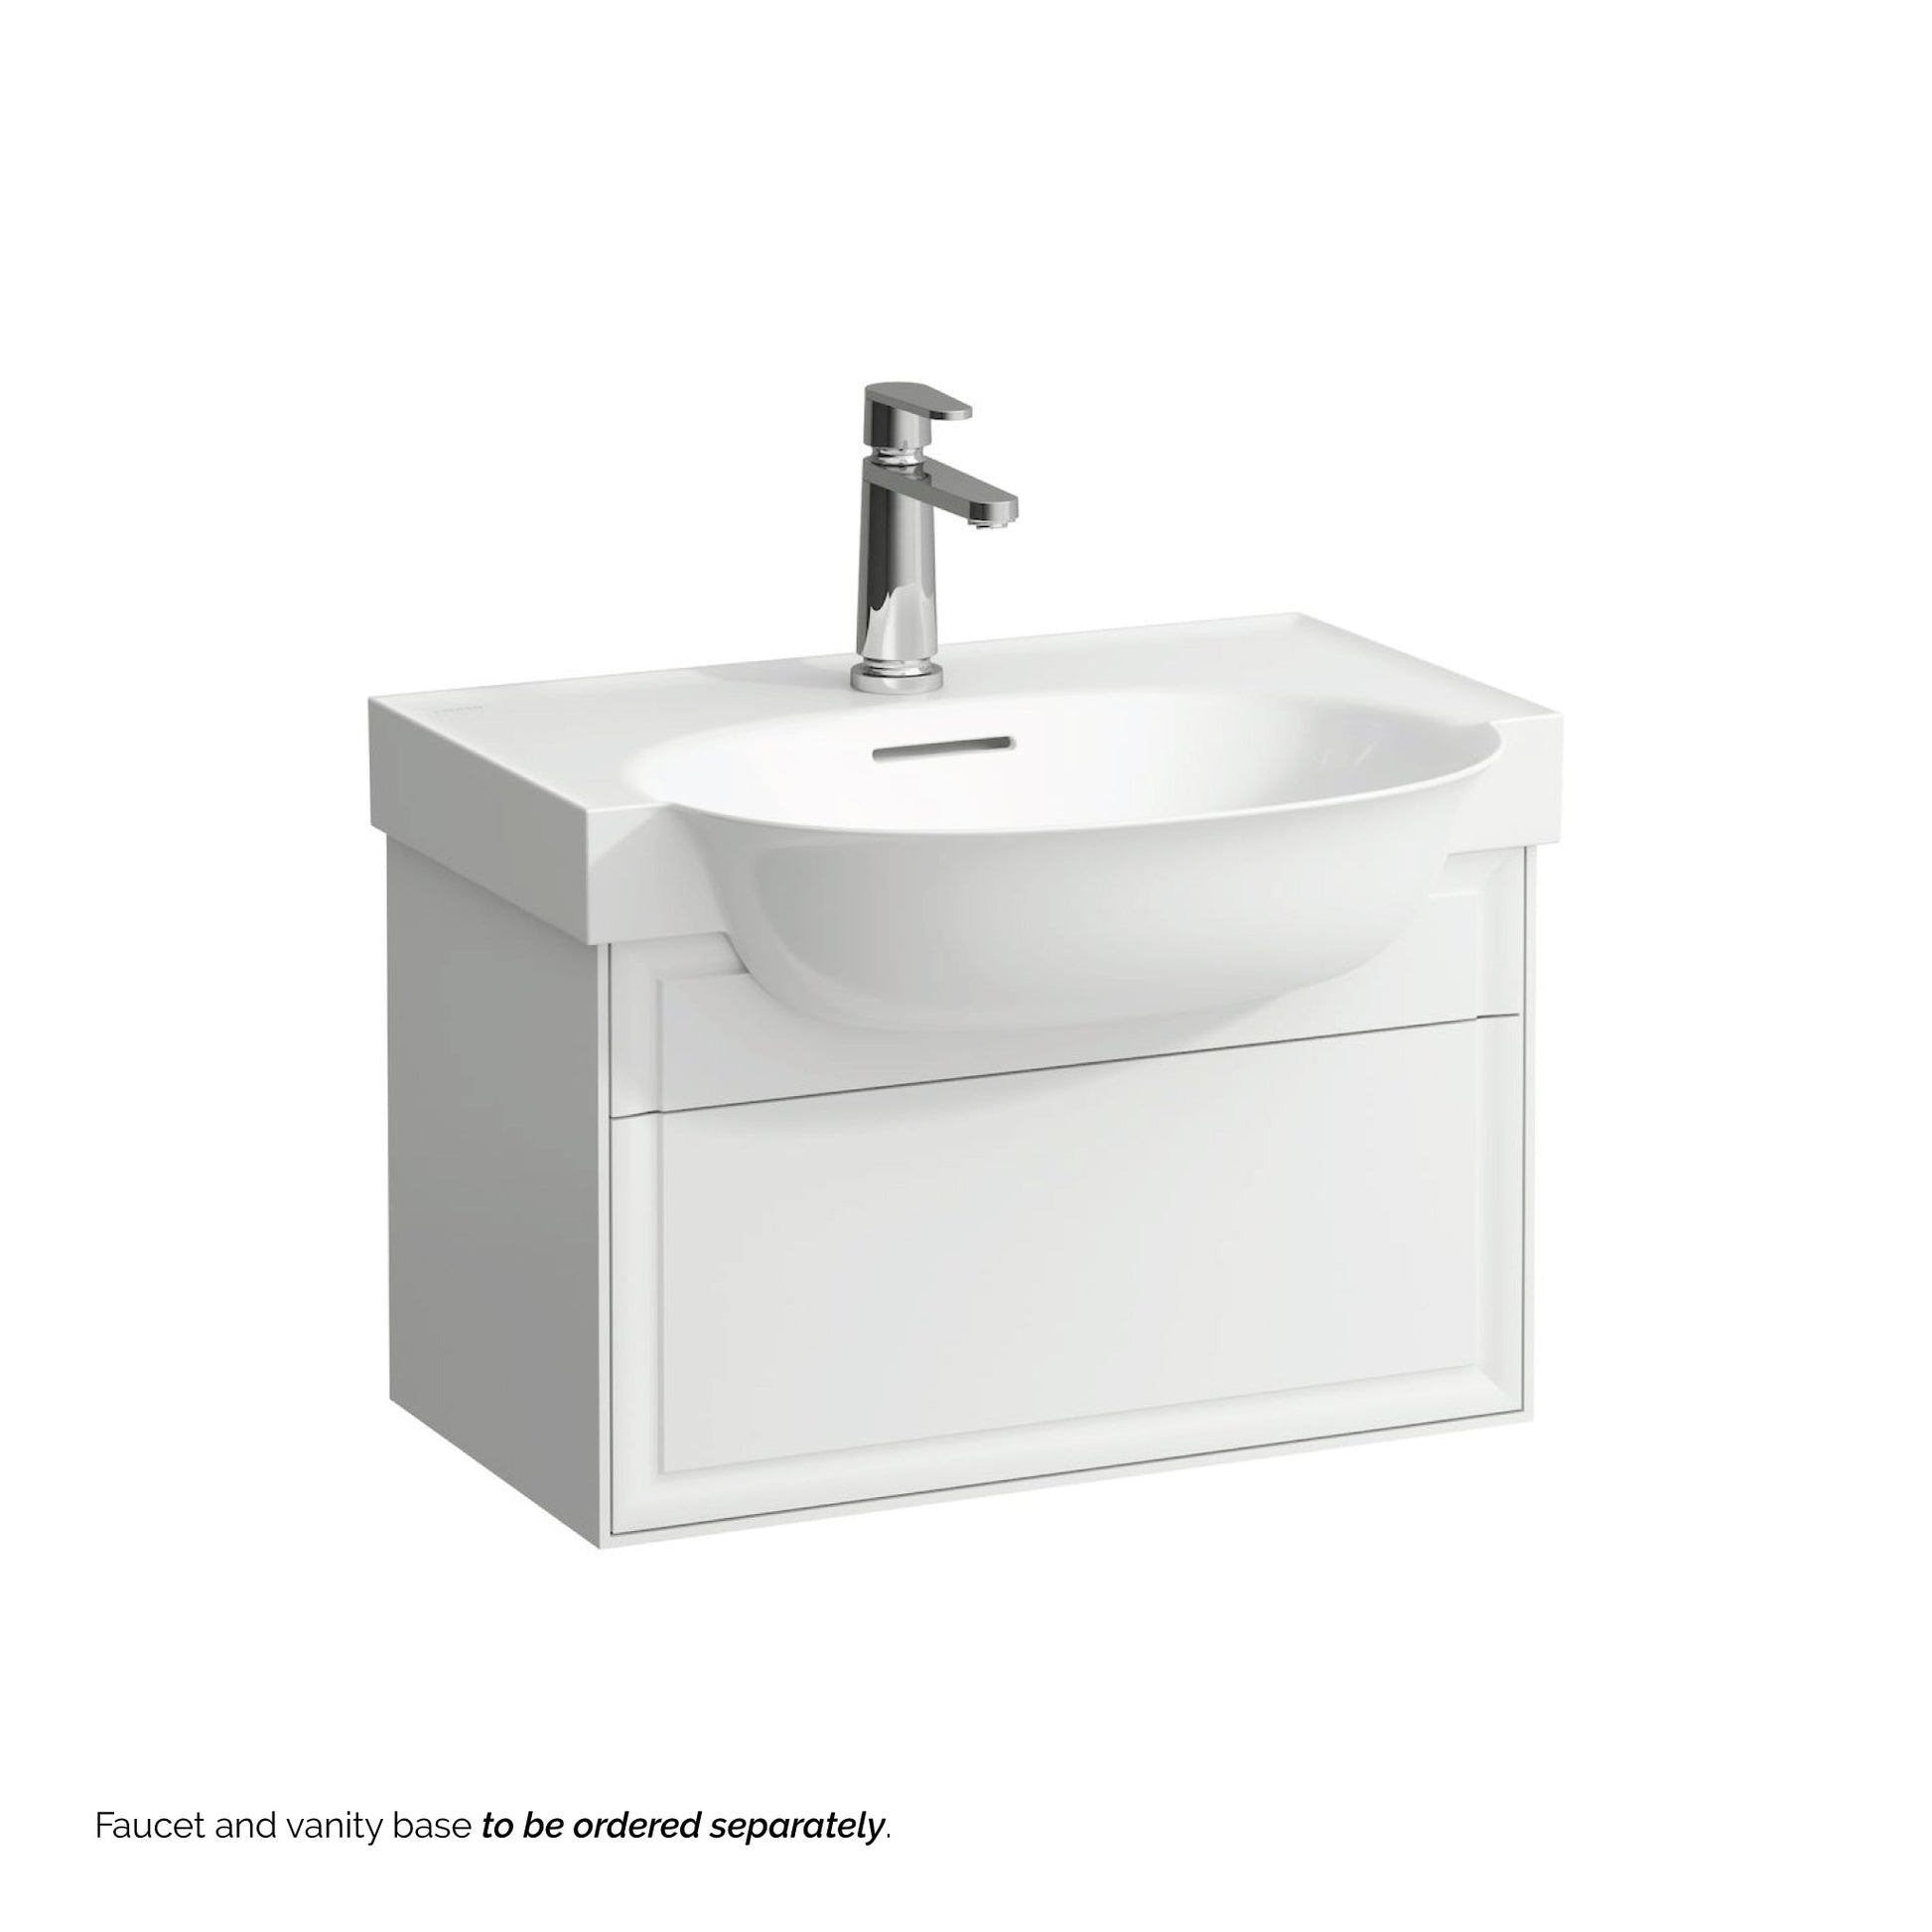 Laufen New Classic 24" x 19" White Ceramic Wall-Mounted Bathroom Sink With Faucet Hole